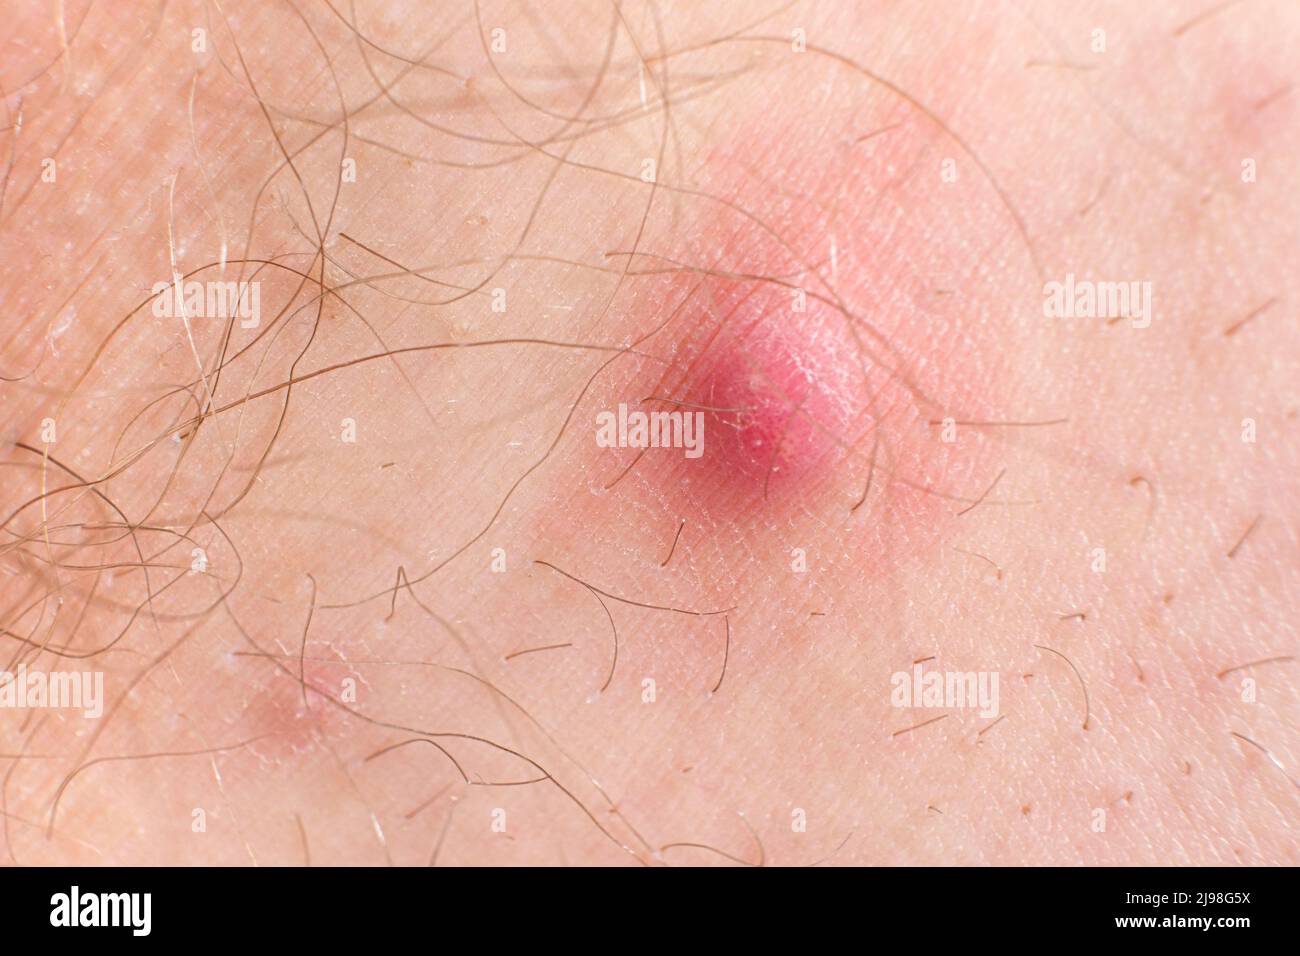 A large red pimple on a skin. Inflammation on the skin, acne Stock Photo - Alamy